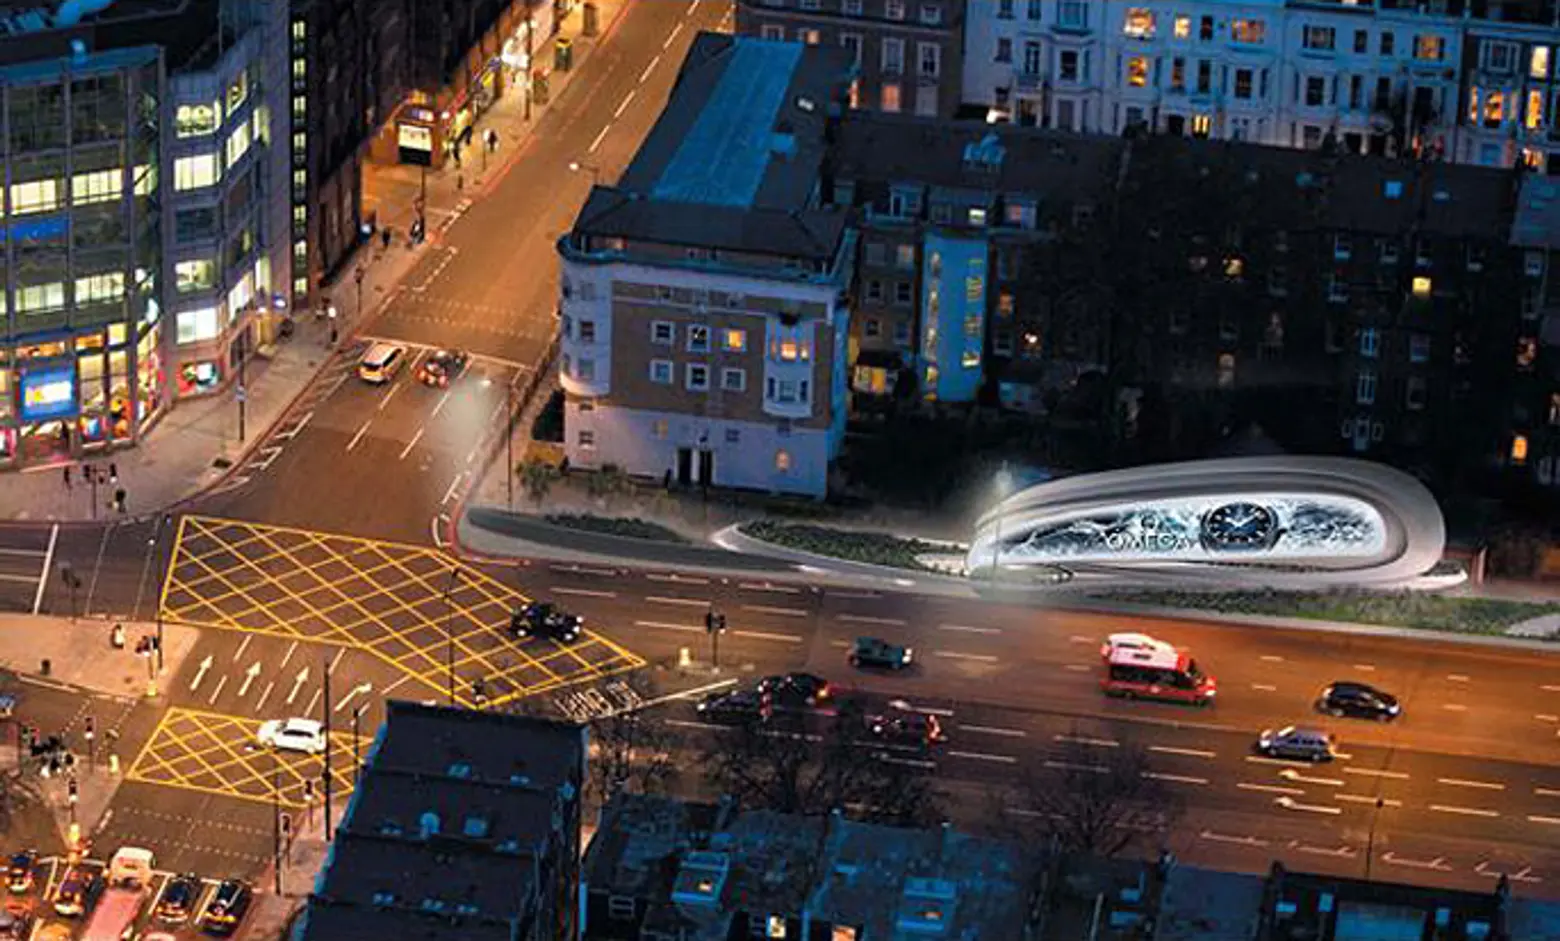 JCDecaux-Advertising-Sculpture-by-Zaha-Hadid-Architects-3